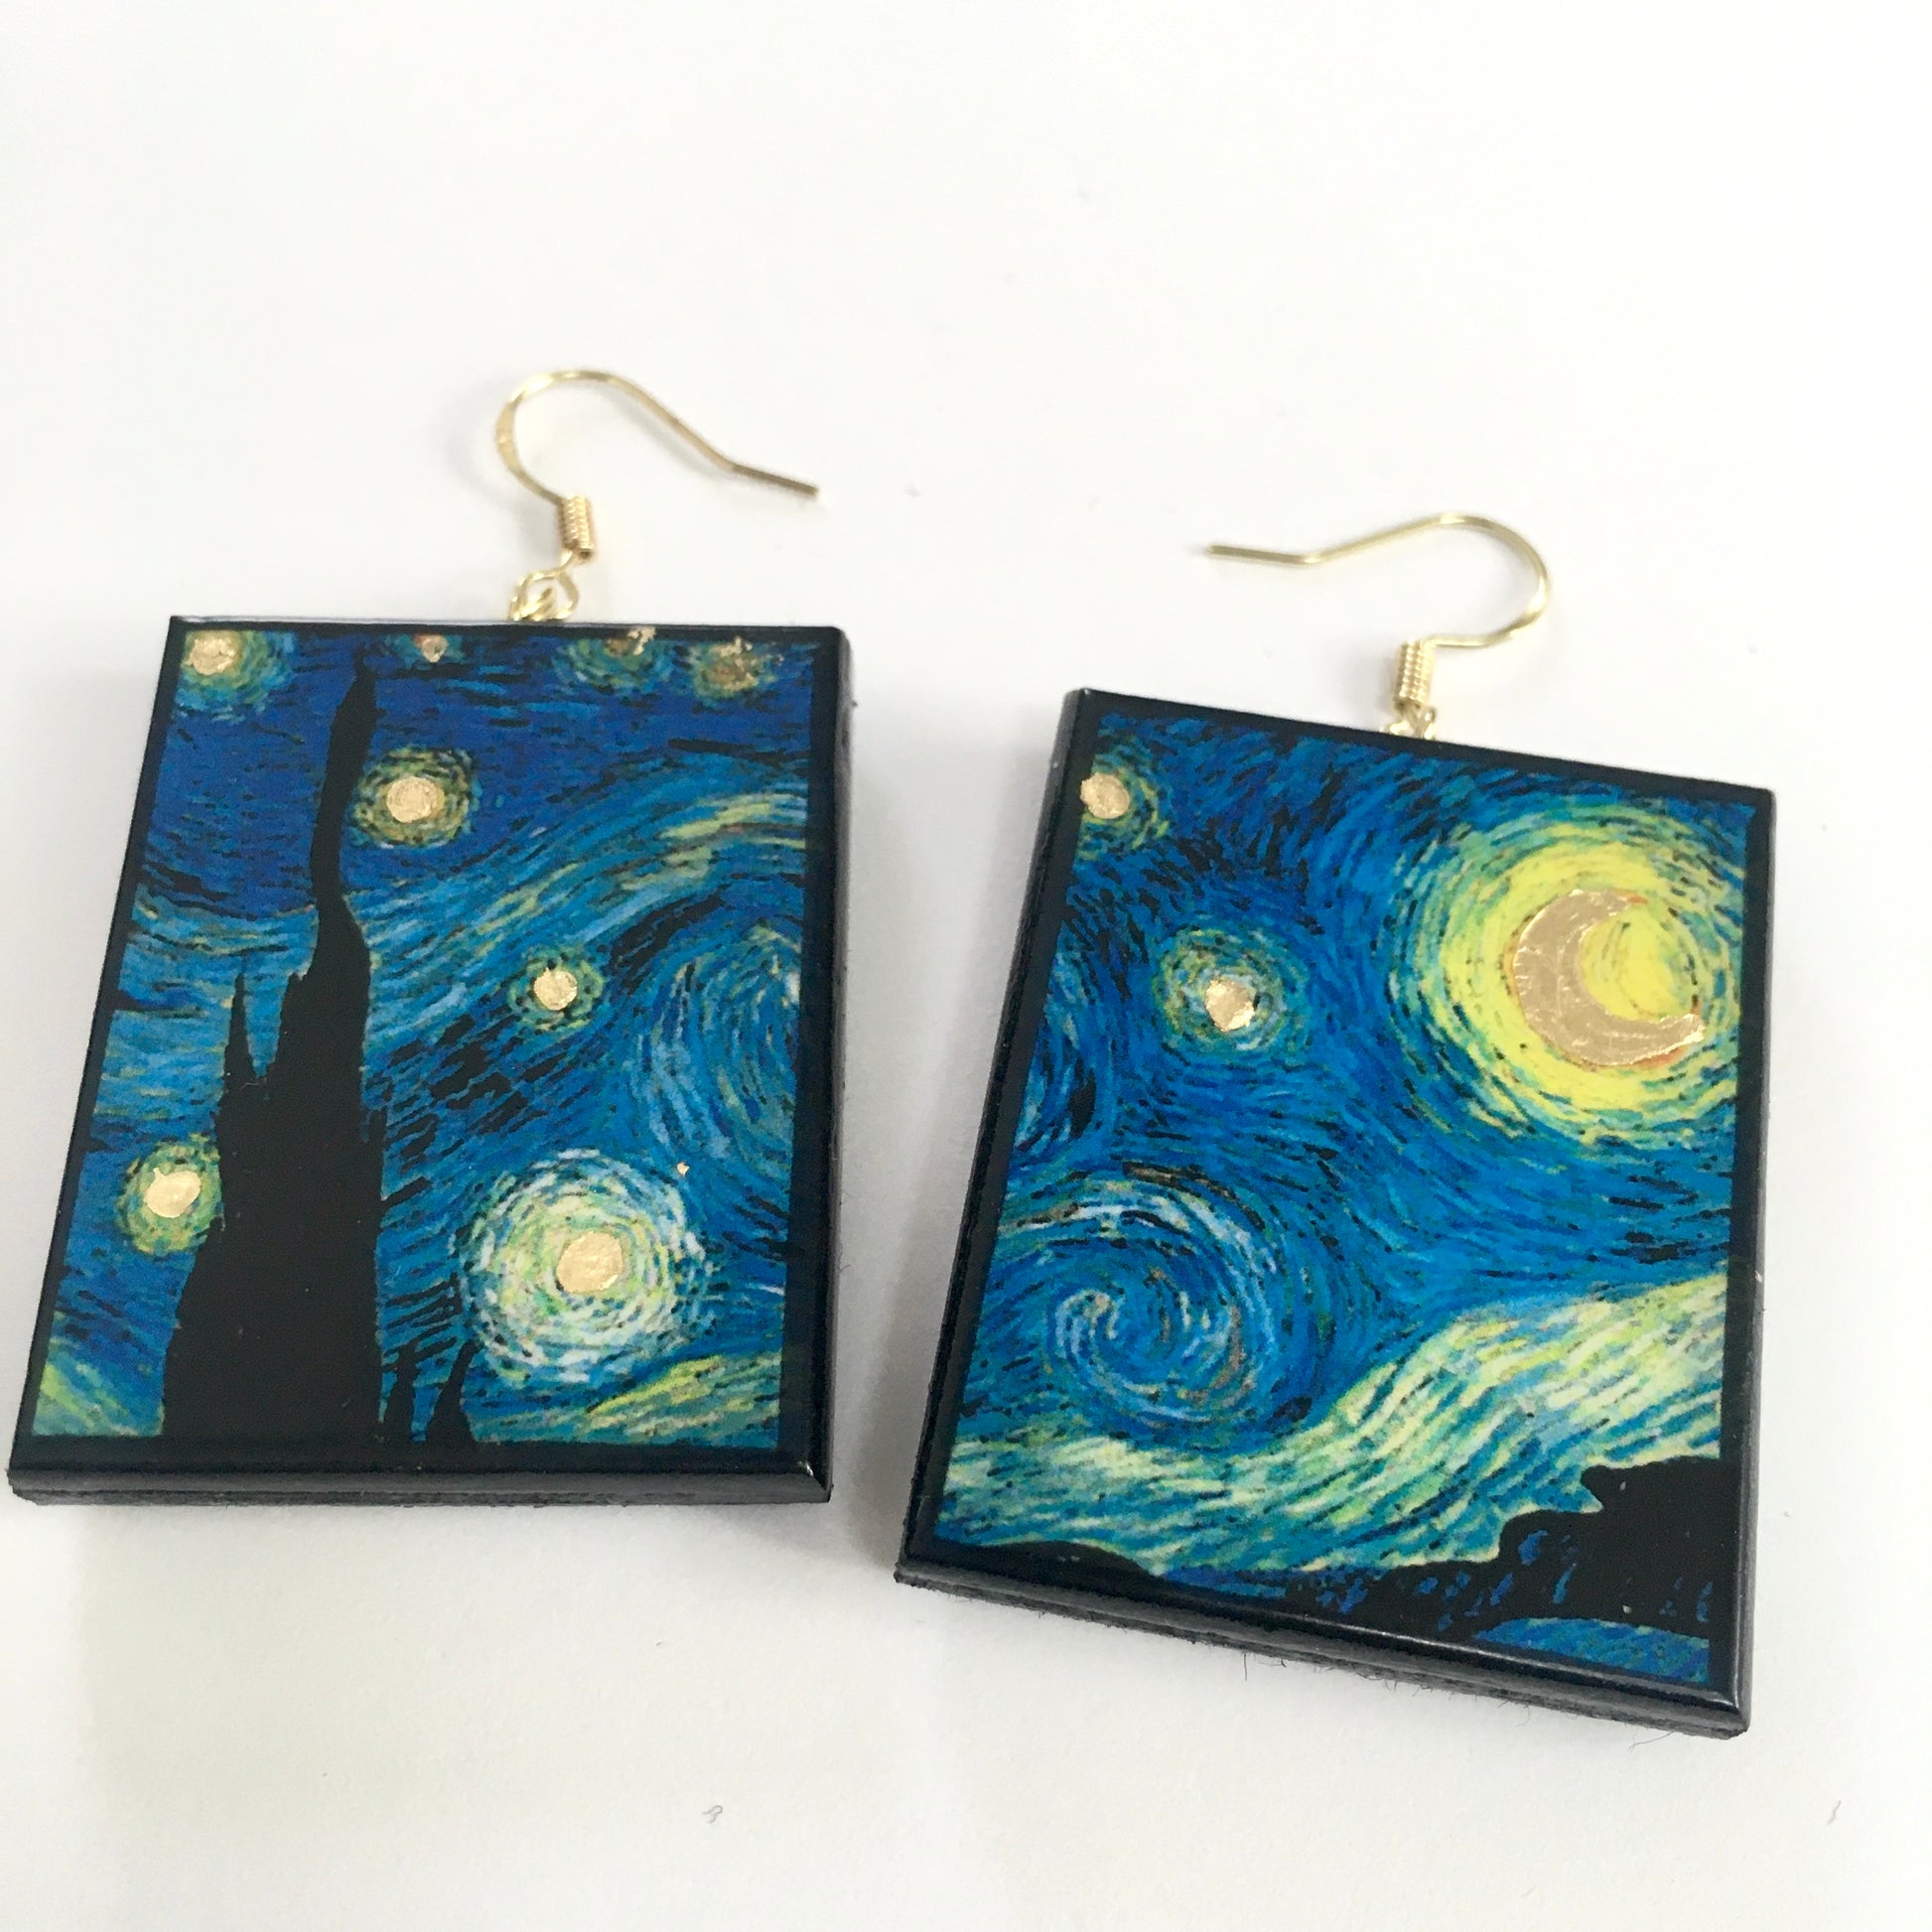 Earrings shaped rectangular with some art details in gold leaf inspired by Vincent Van Gogh's "Starry Night" painting. Blue sky and gold little stars dangle earrings in sustainable wood. Handmade by Obljewellery